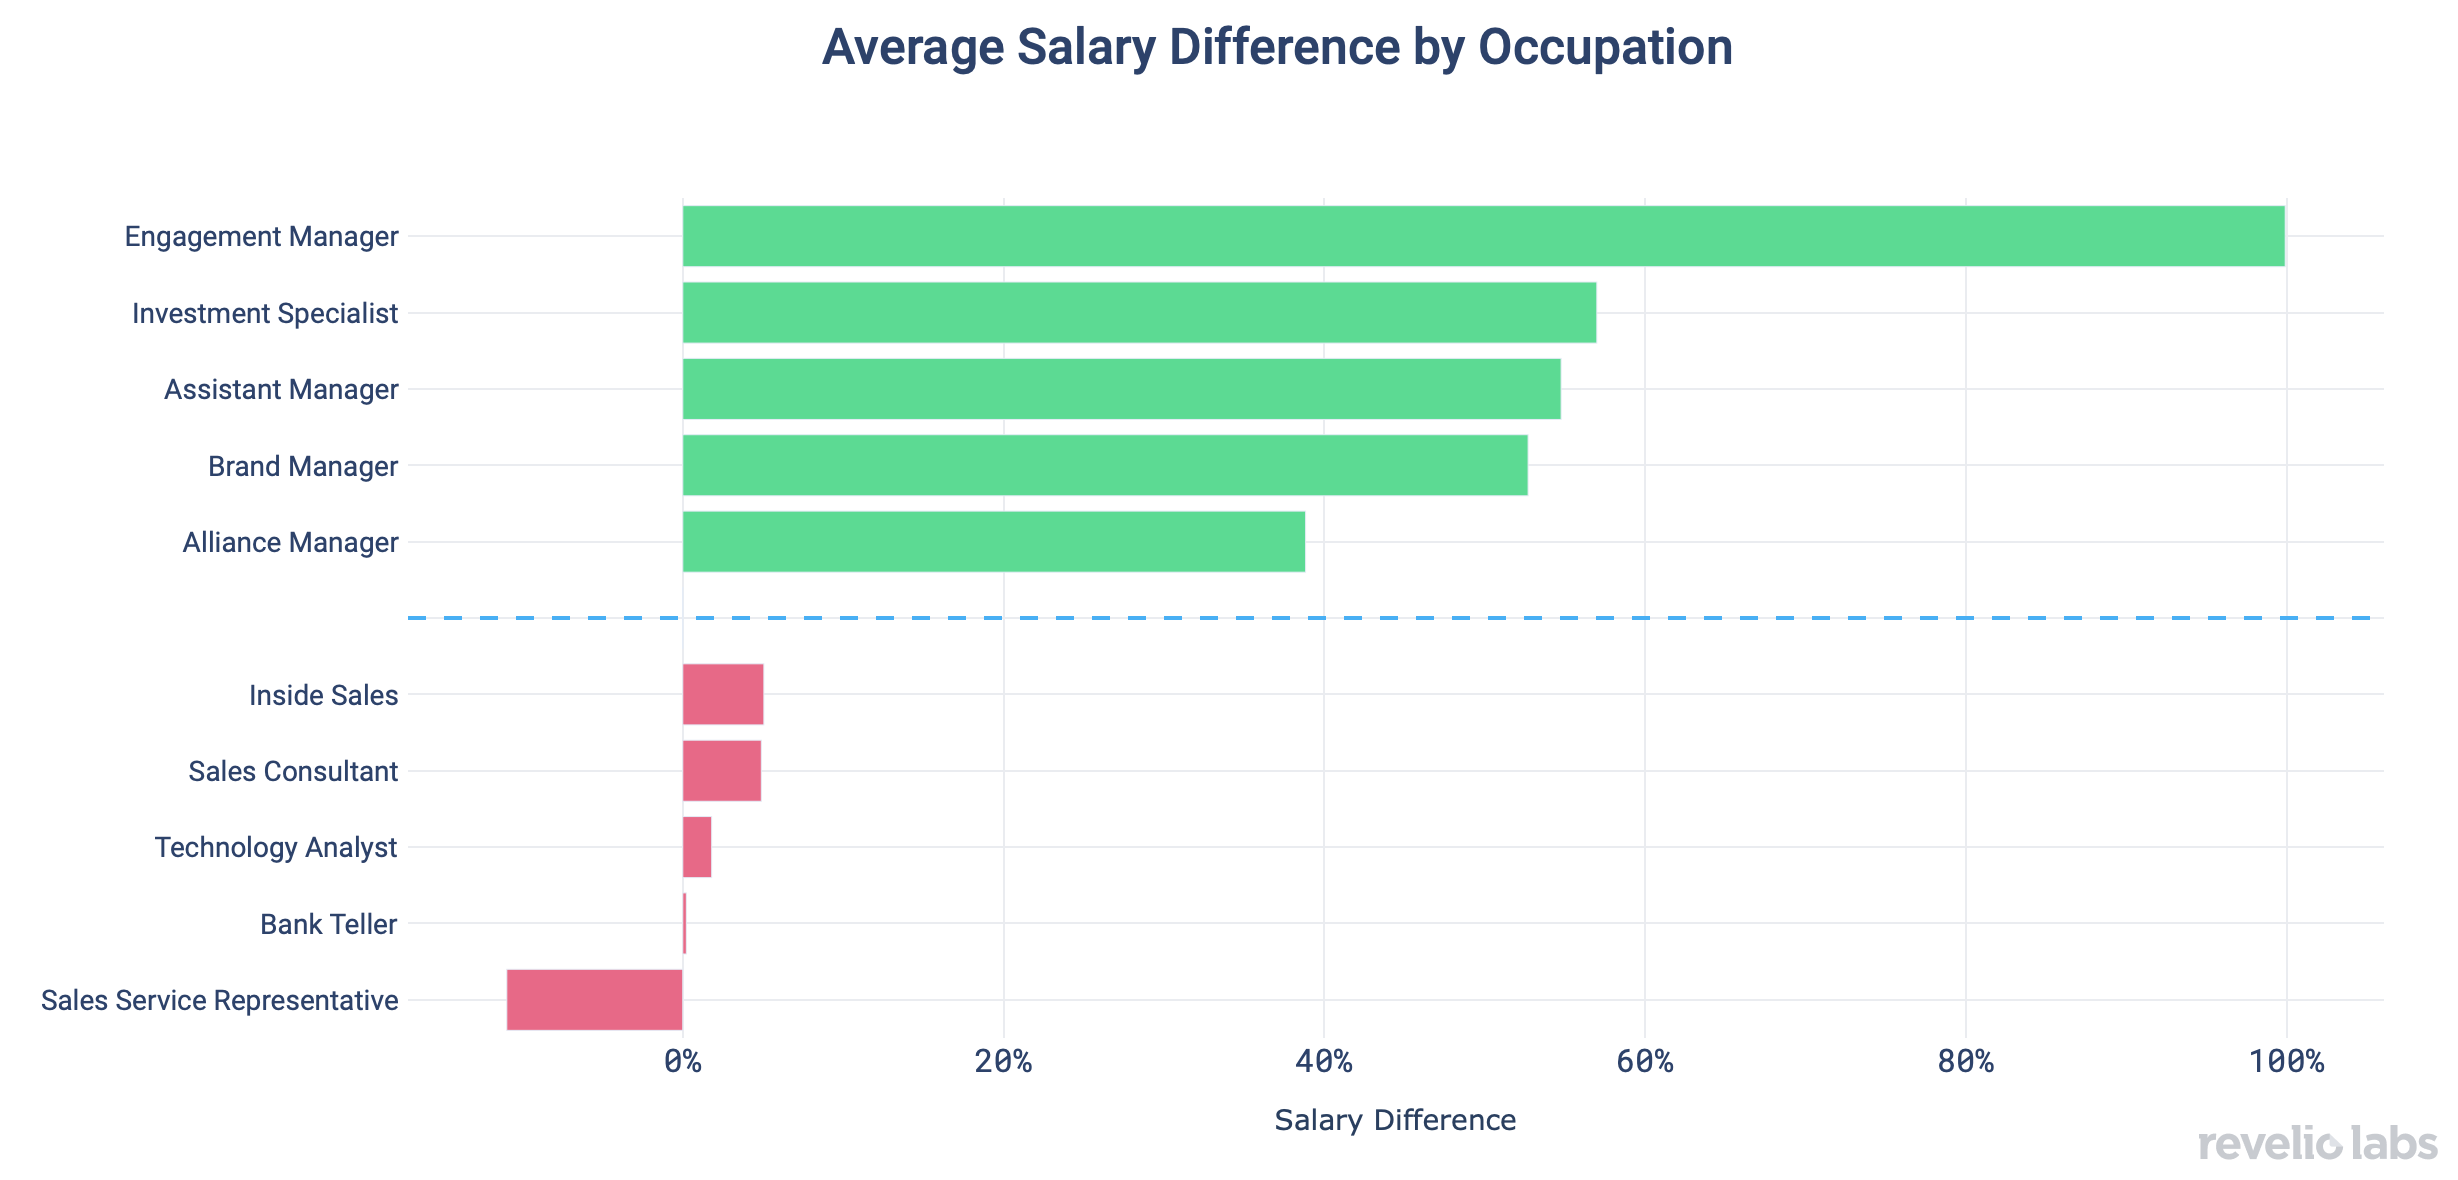 Average Salary Difference by Occupation